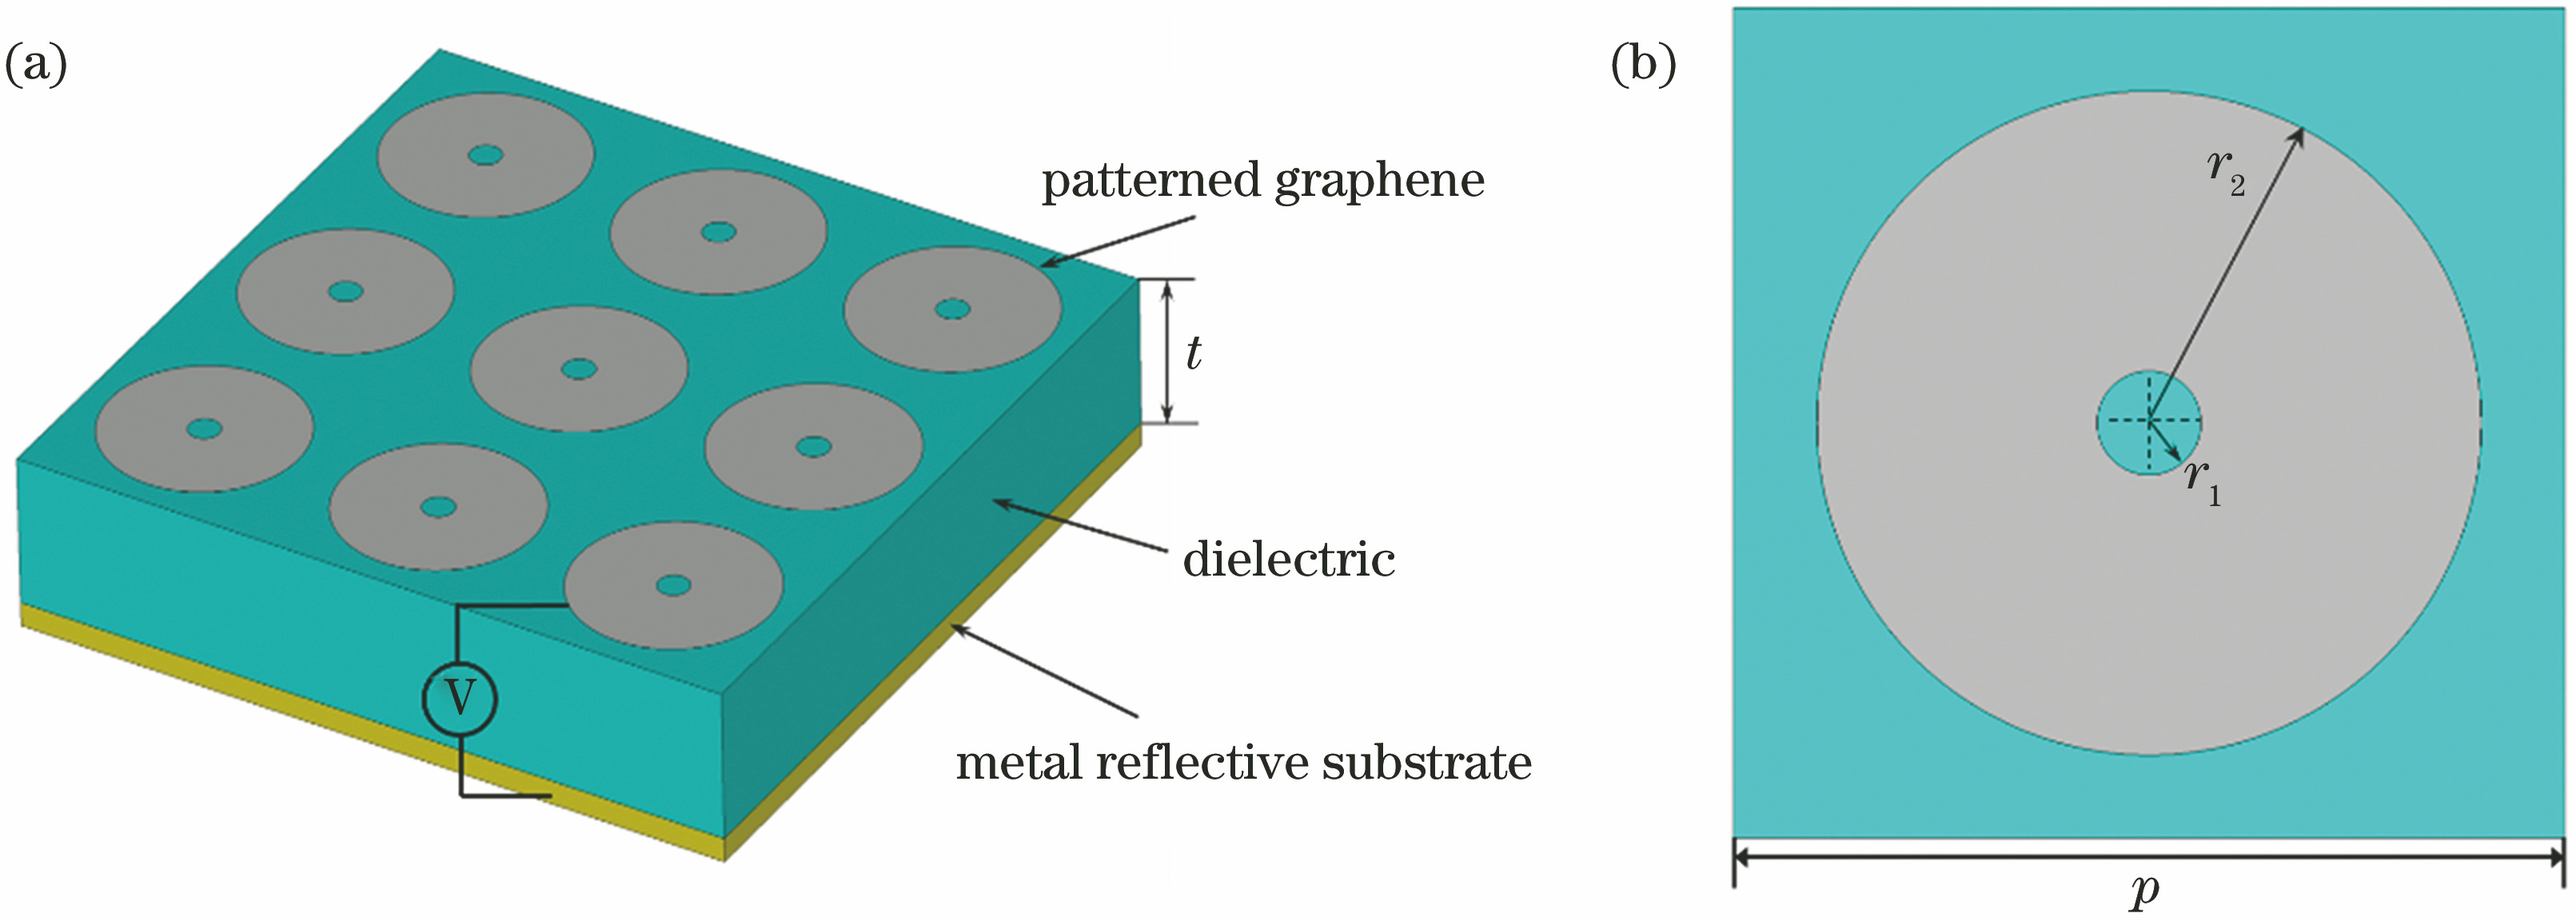 Terahertz absorber based on monolayer graphene metamaterial. (a) Three-dimensional structure diagram; (b) top view of unit